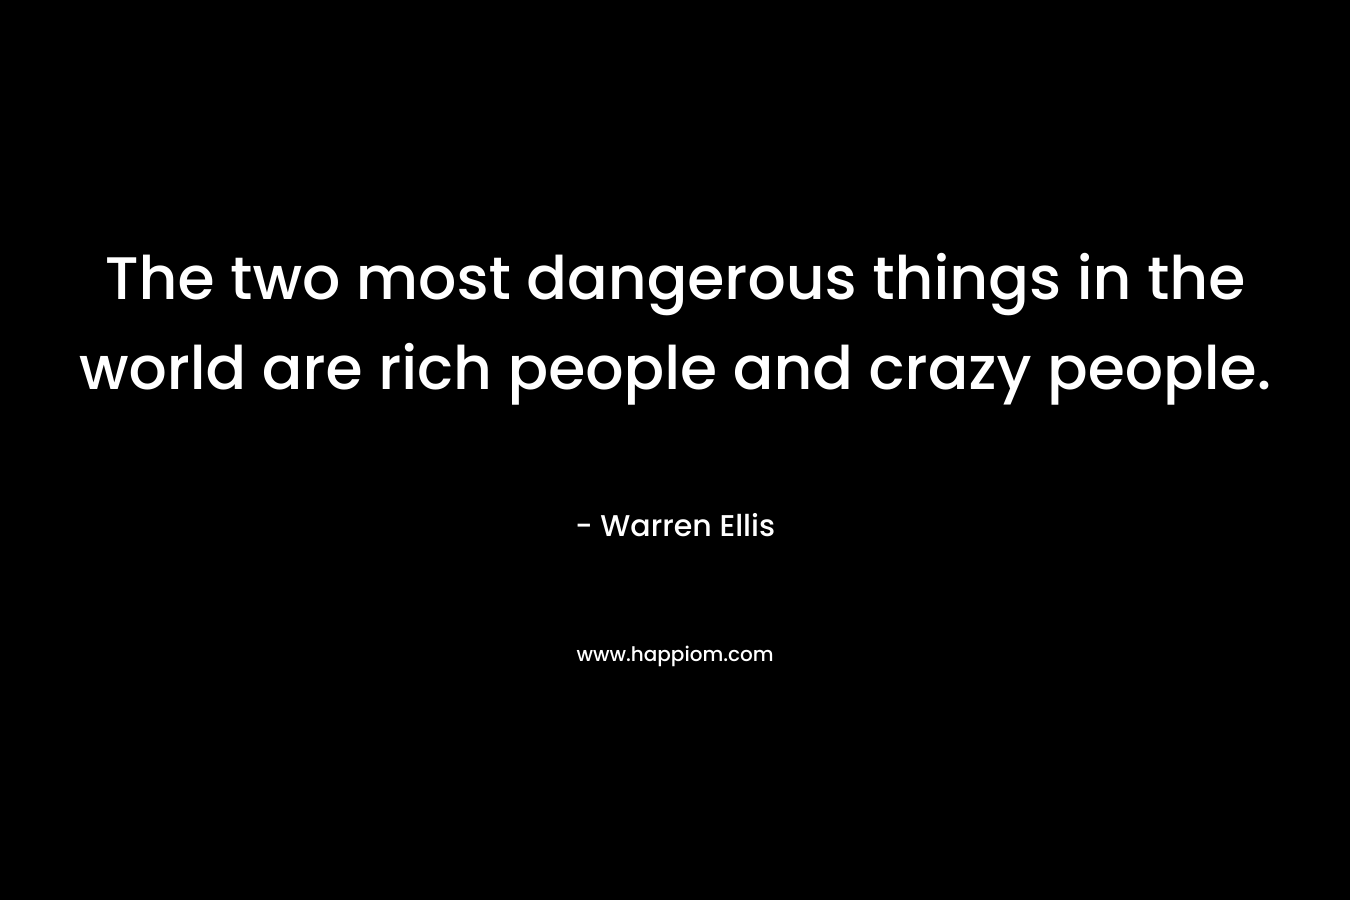 The two most dangerous things in the world are rich people and crazy people.